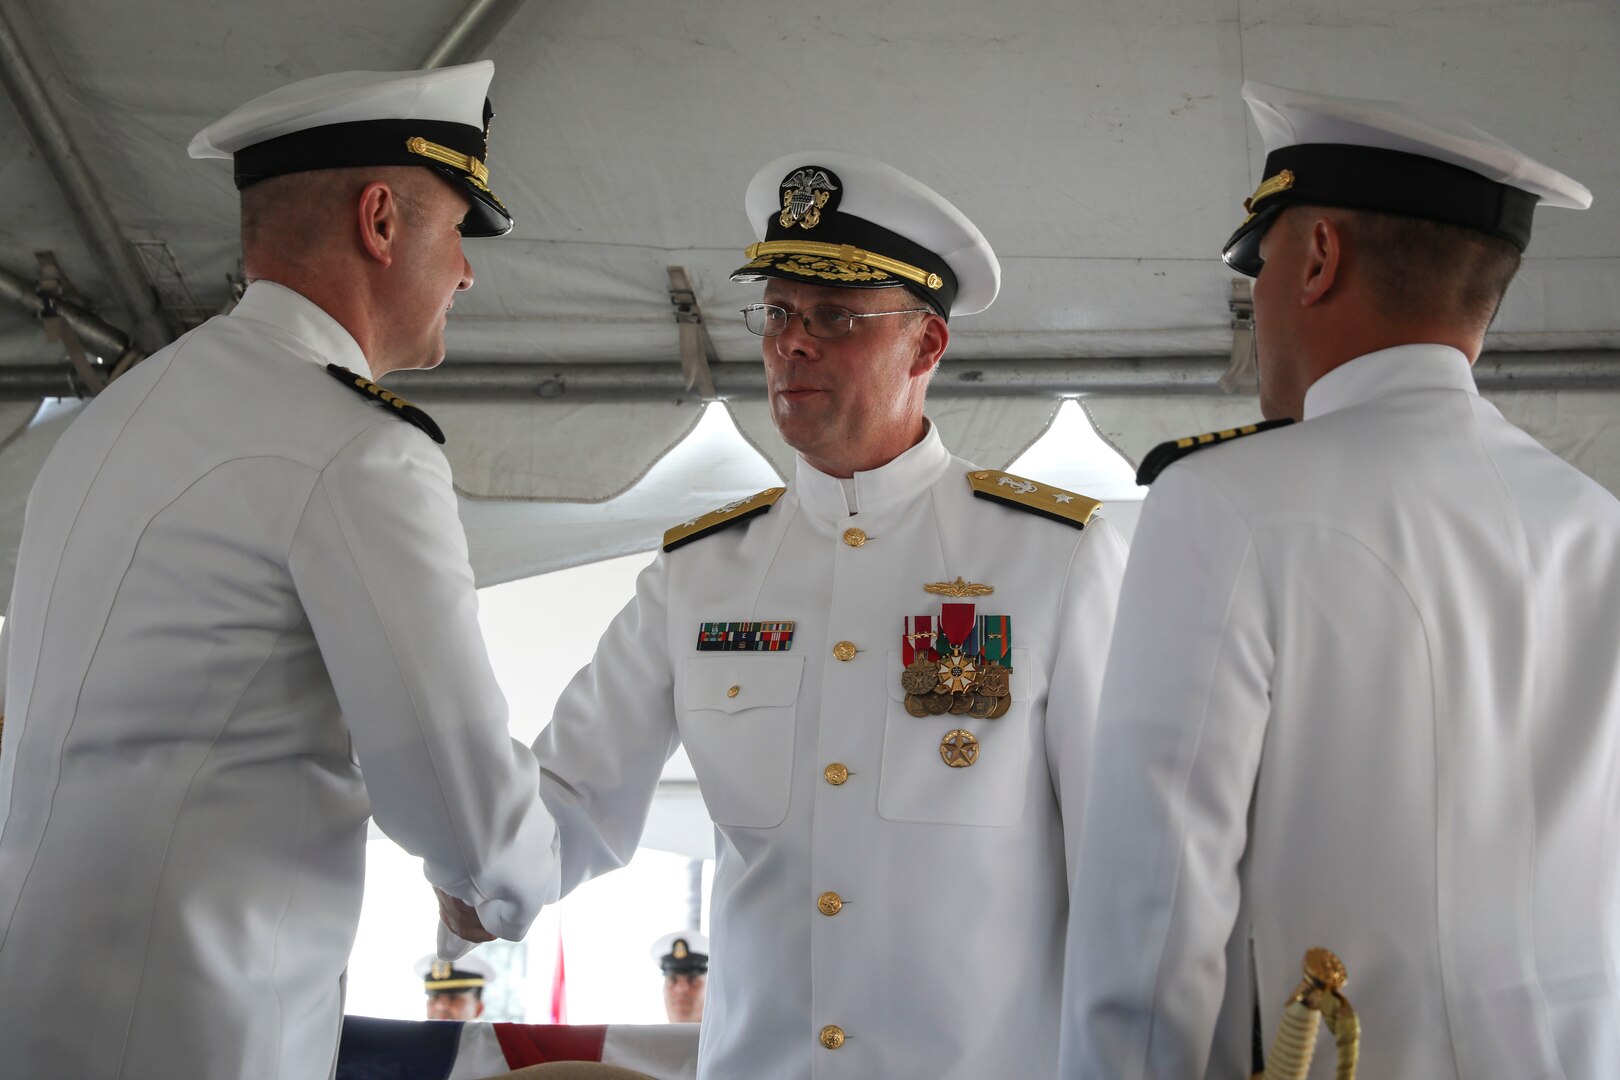 Capt. Khary W. Hembree-Bey reliieved Capt. Richard A. Braunbeck III as the commanding officer of Naval Surface Warfare Center, Corona Division in a change of command ceremony, Rear Adm. Eric Ver Hage, Commander, NAVSEA Warfare Centers, presided over the ceremony.